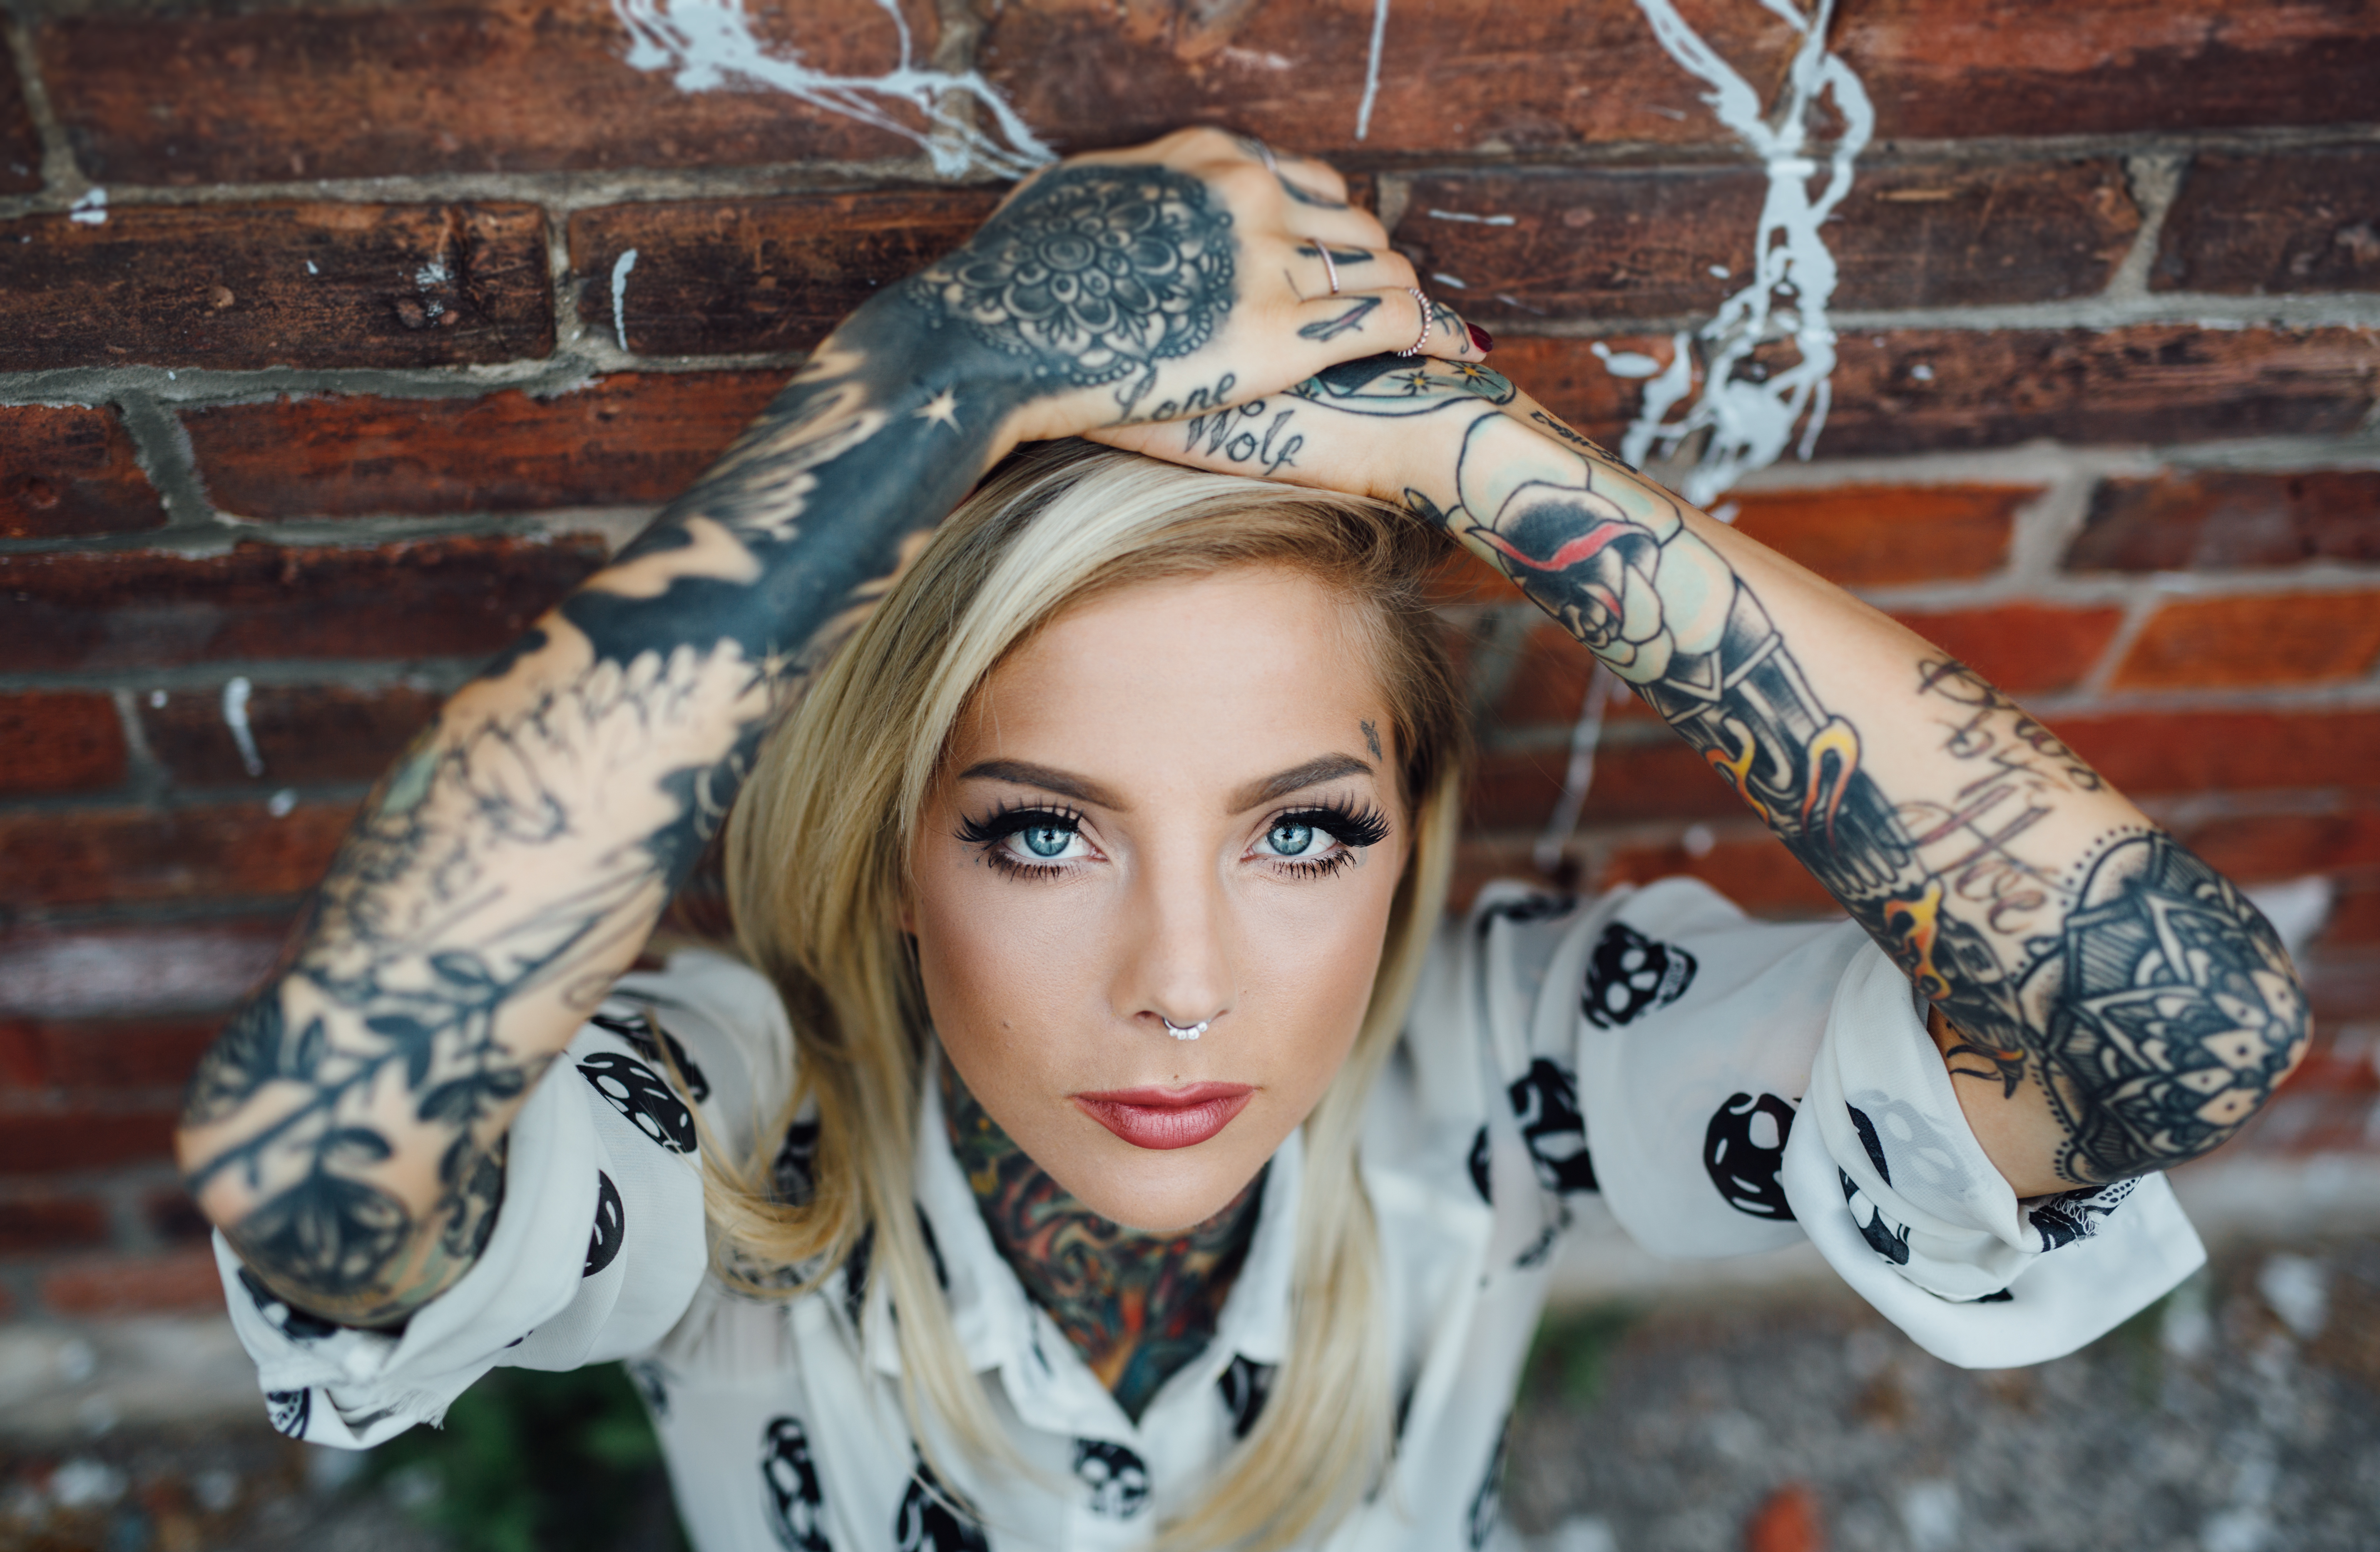 170+ Tattoo HD Wallpapers and Backgrounds